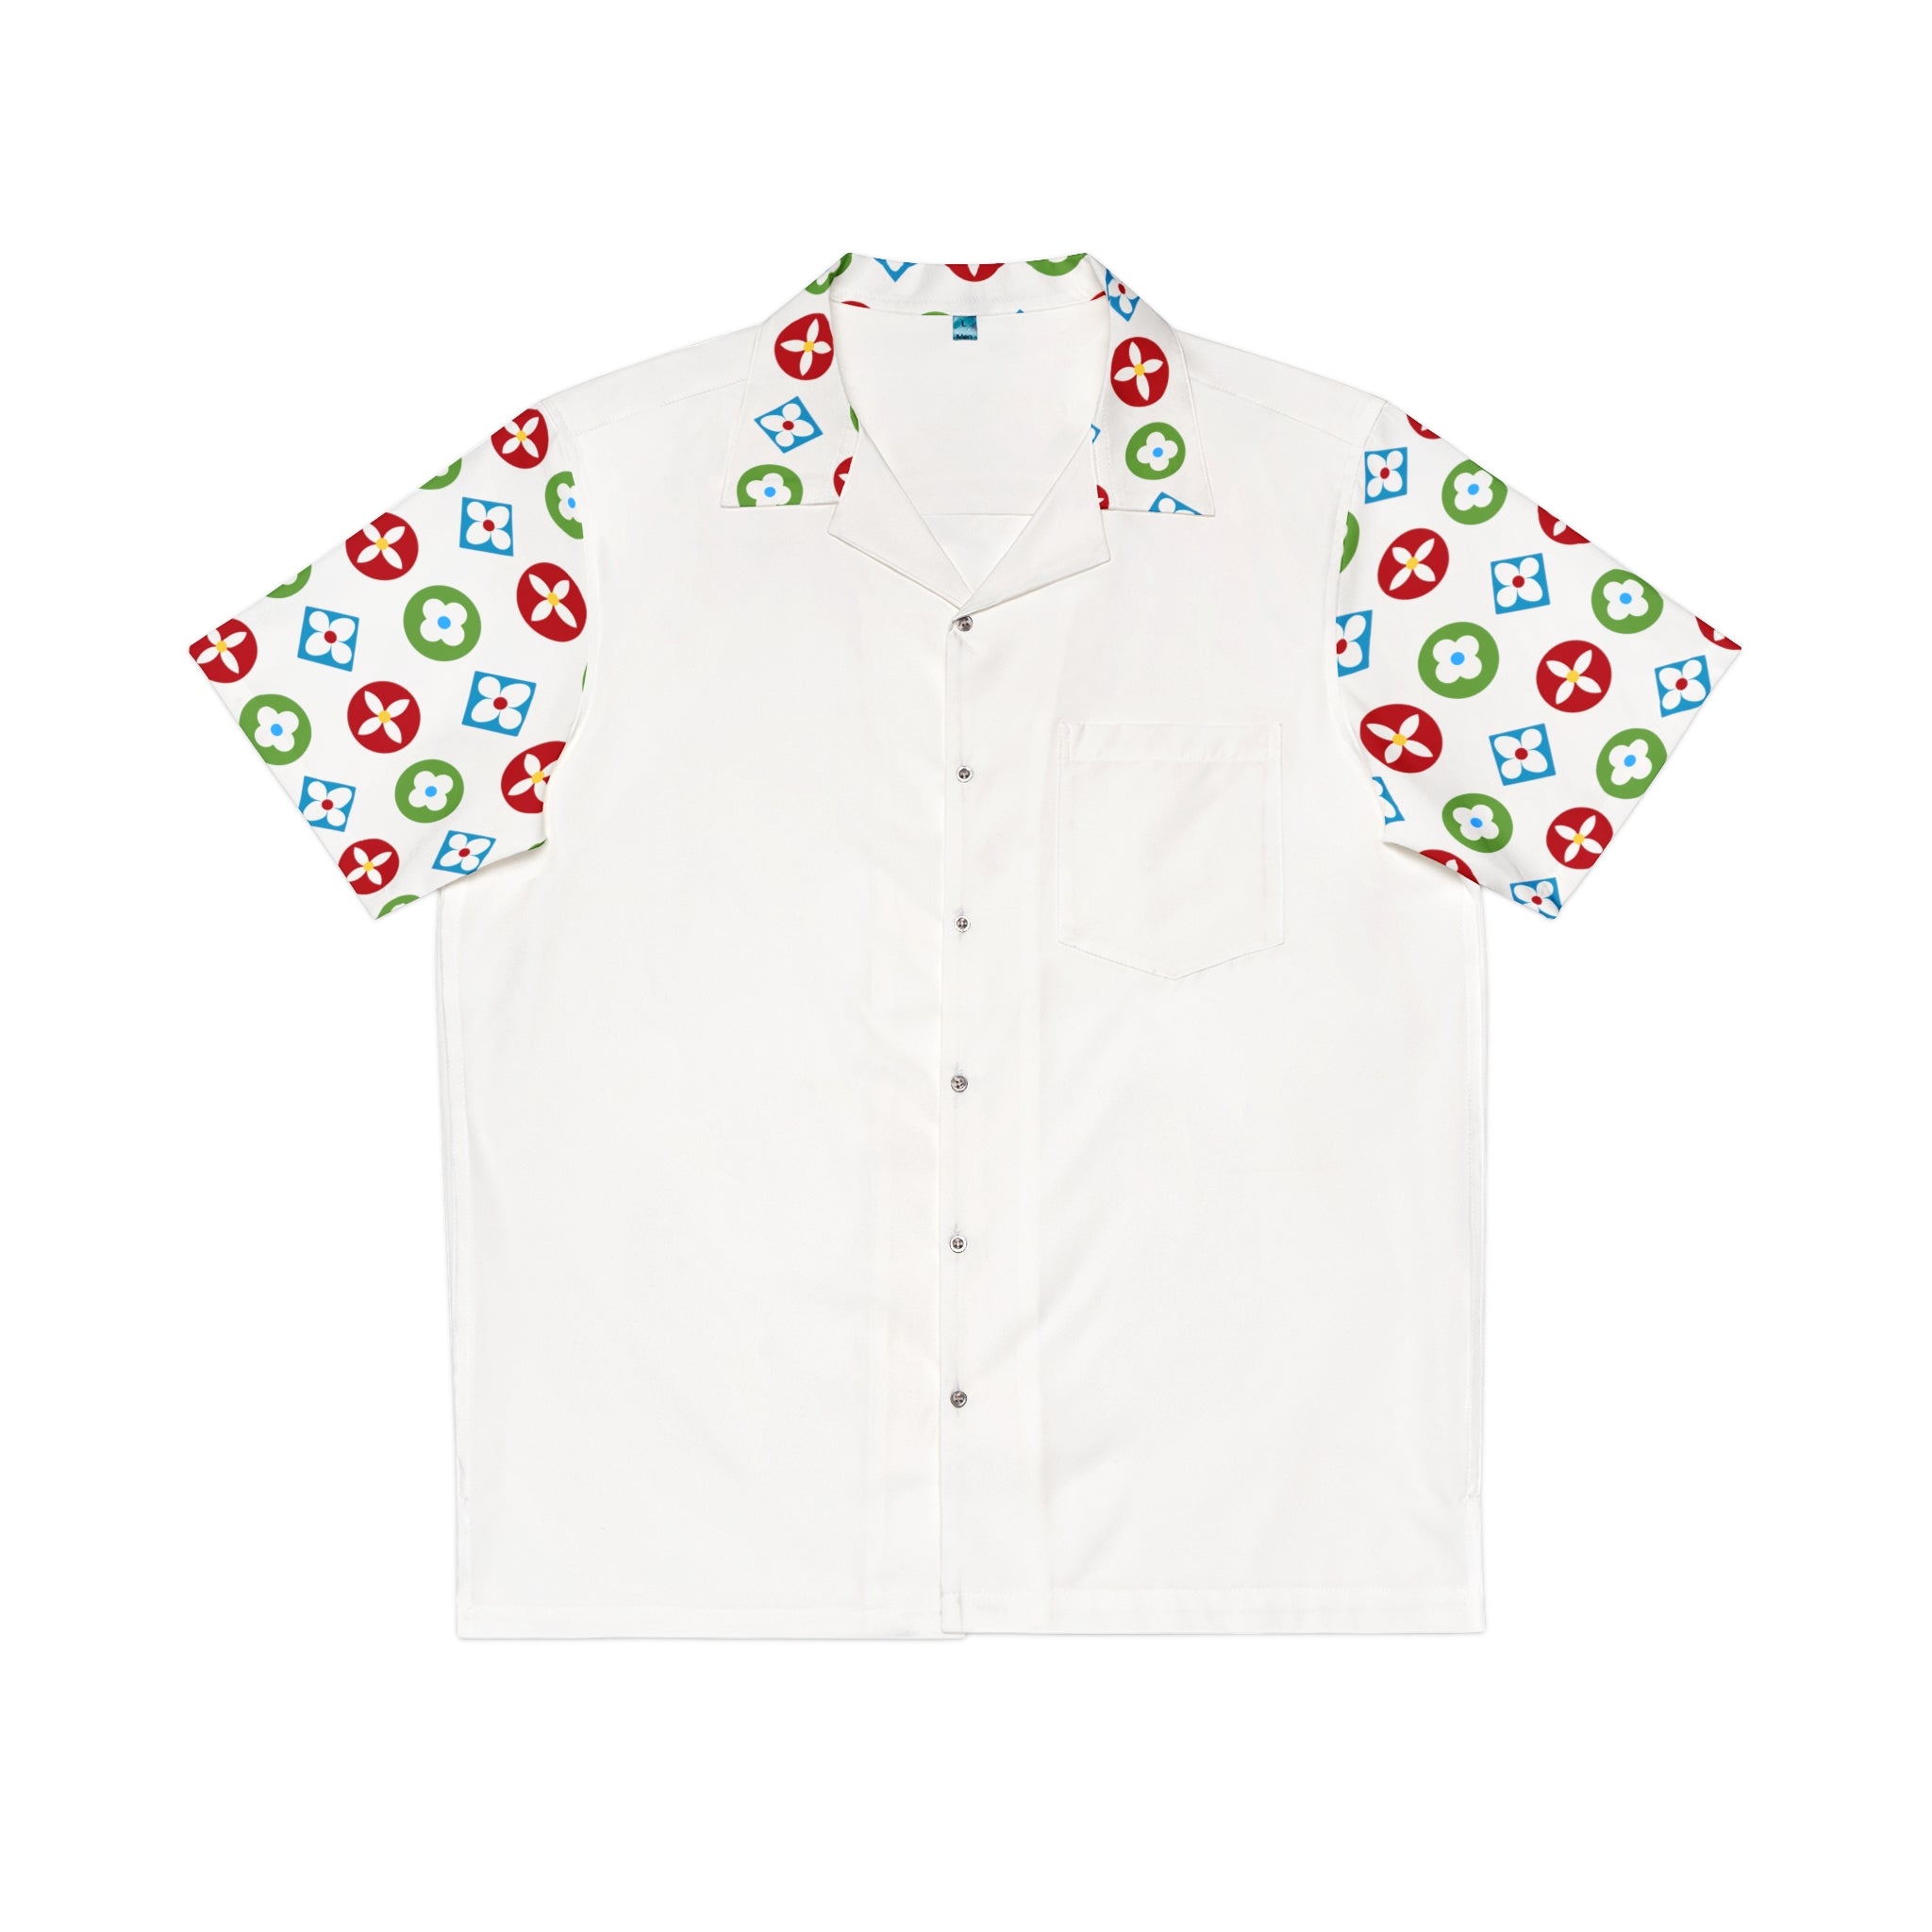  Groove Collection Trilogy of Icons Solid Block (Red, Green, Blue) White Unisex Gender Neutral Button Up Shirt, Hawaiian Shirt Men's Shirts5XLWhite